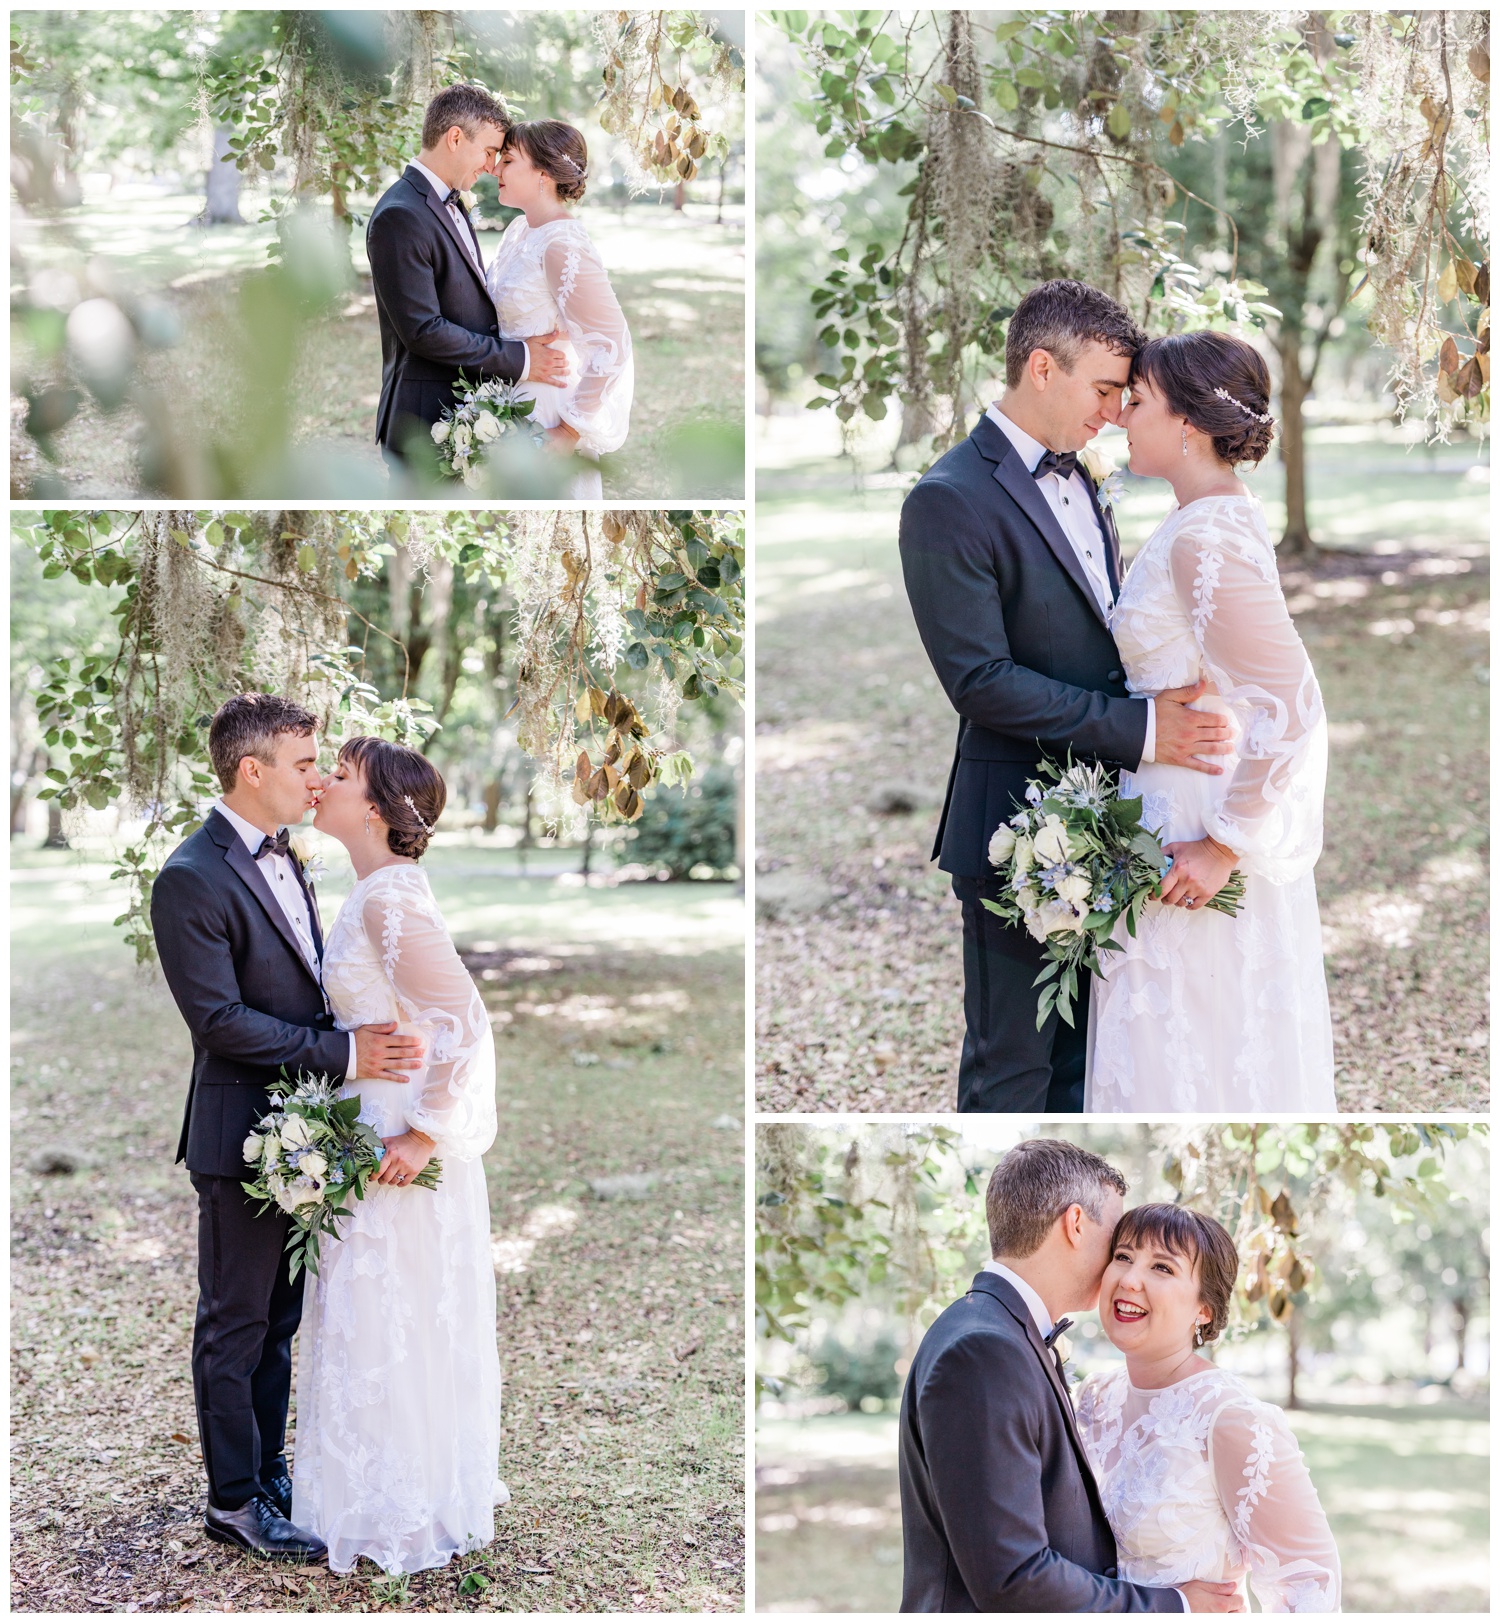 couples photos in forsyth park - the savannah elopement package - flowers by ivory and beau